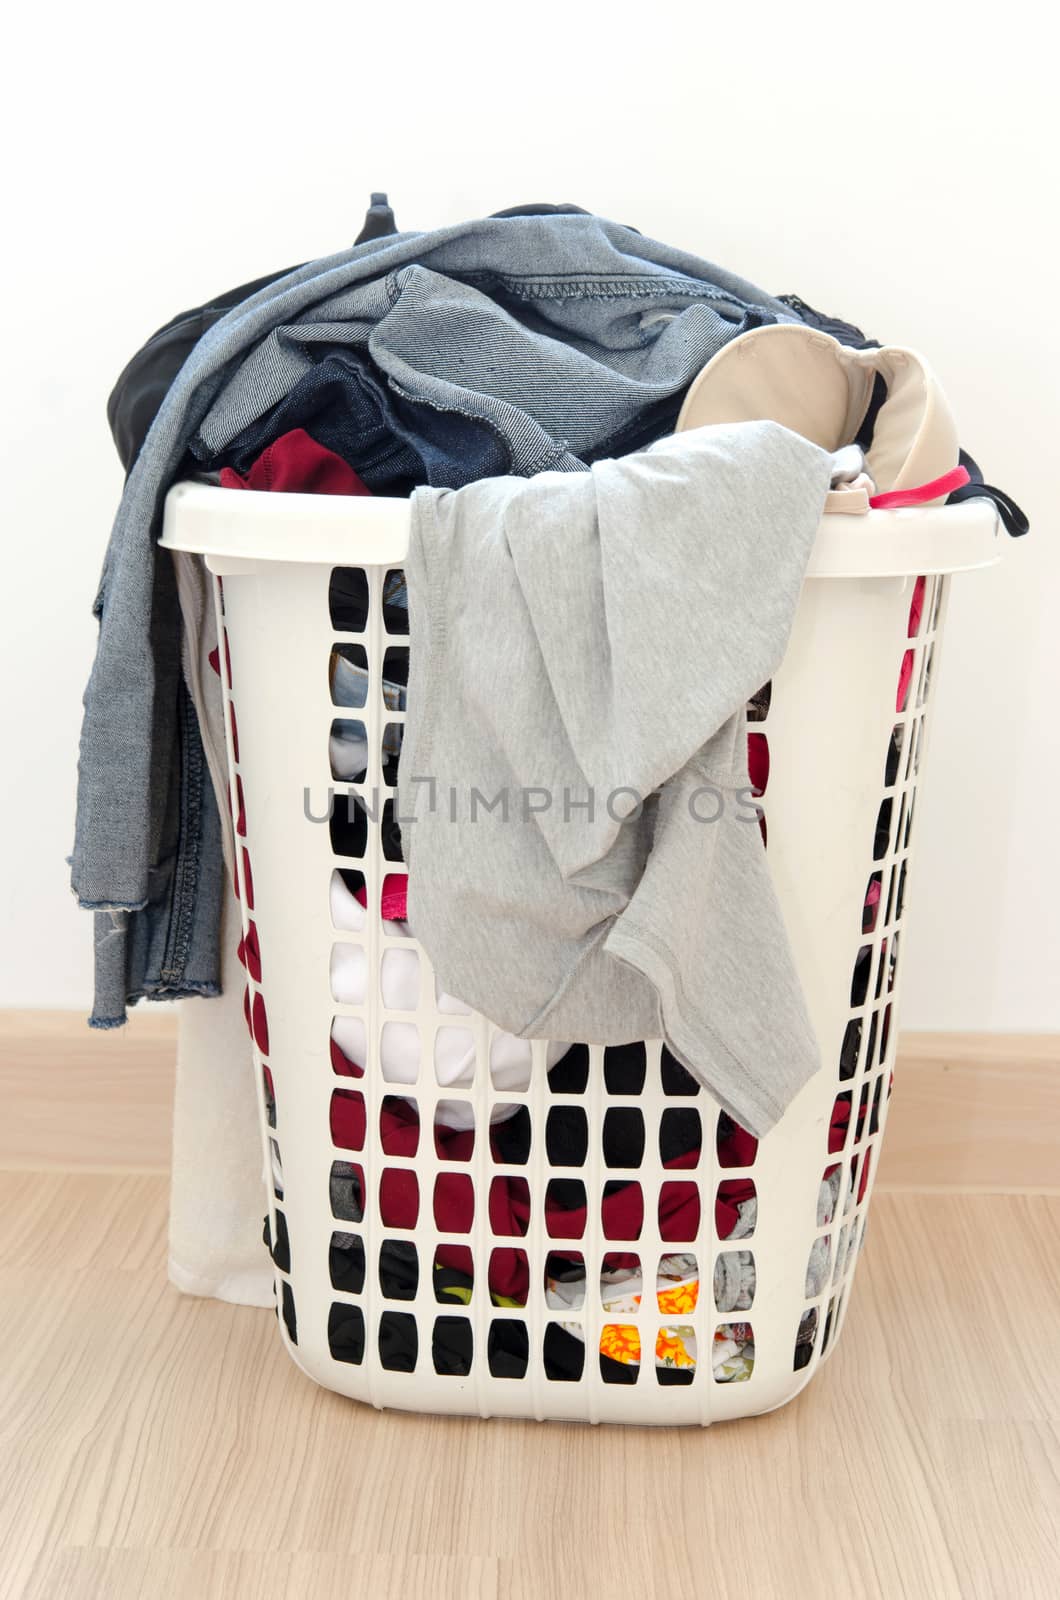 Clothes basket on floor in room.